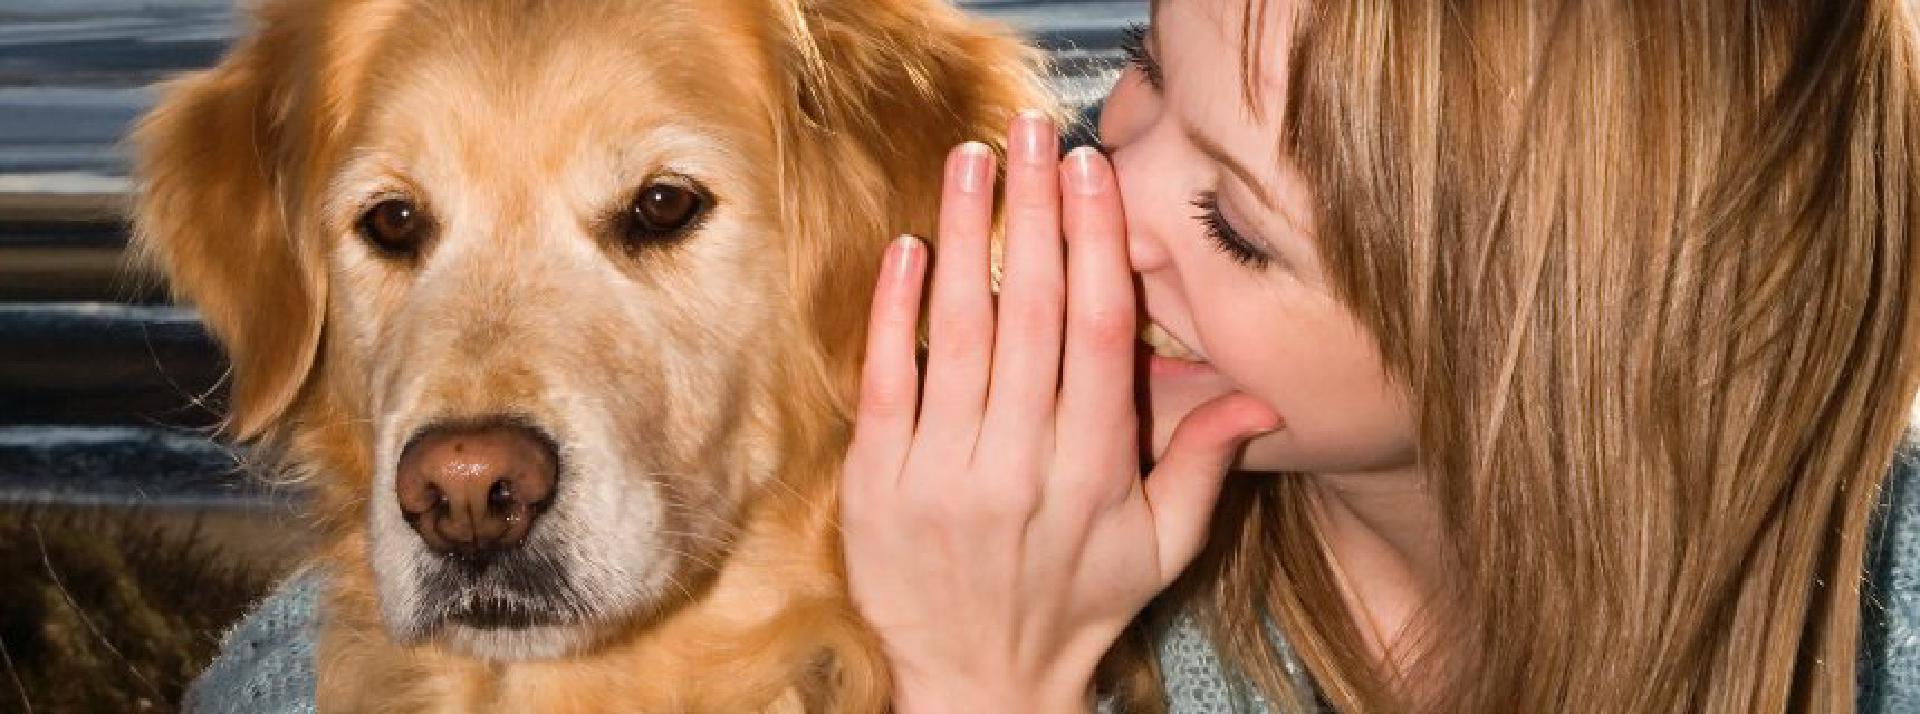 Young Woman Whispering into Dog's Ear